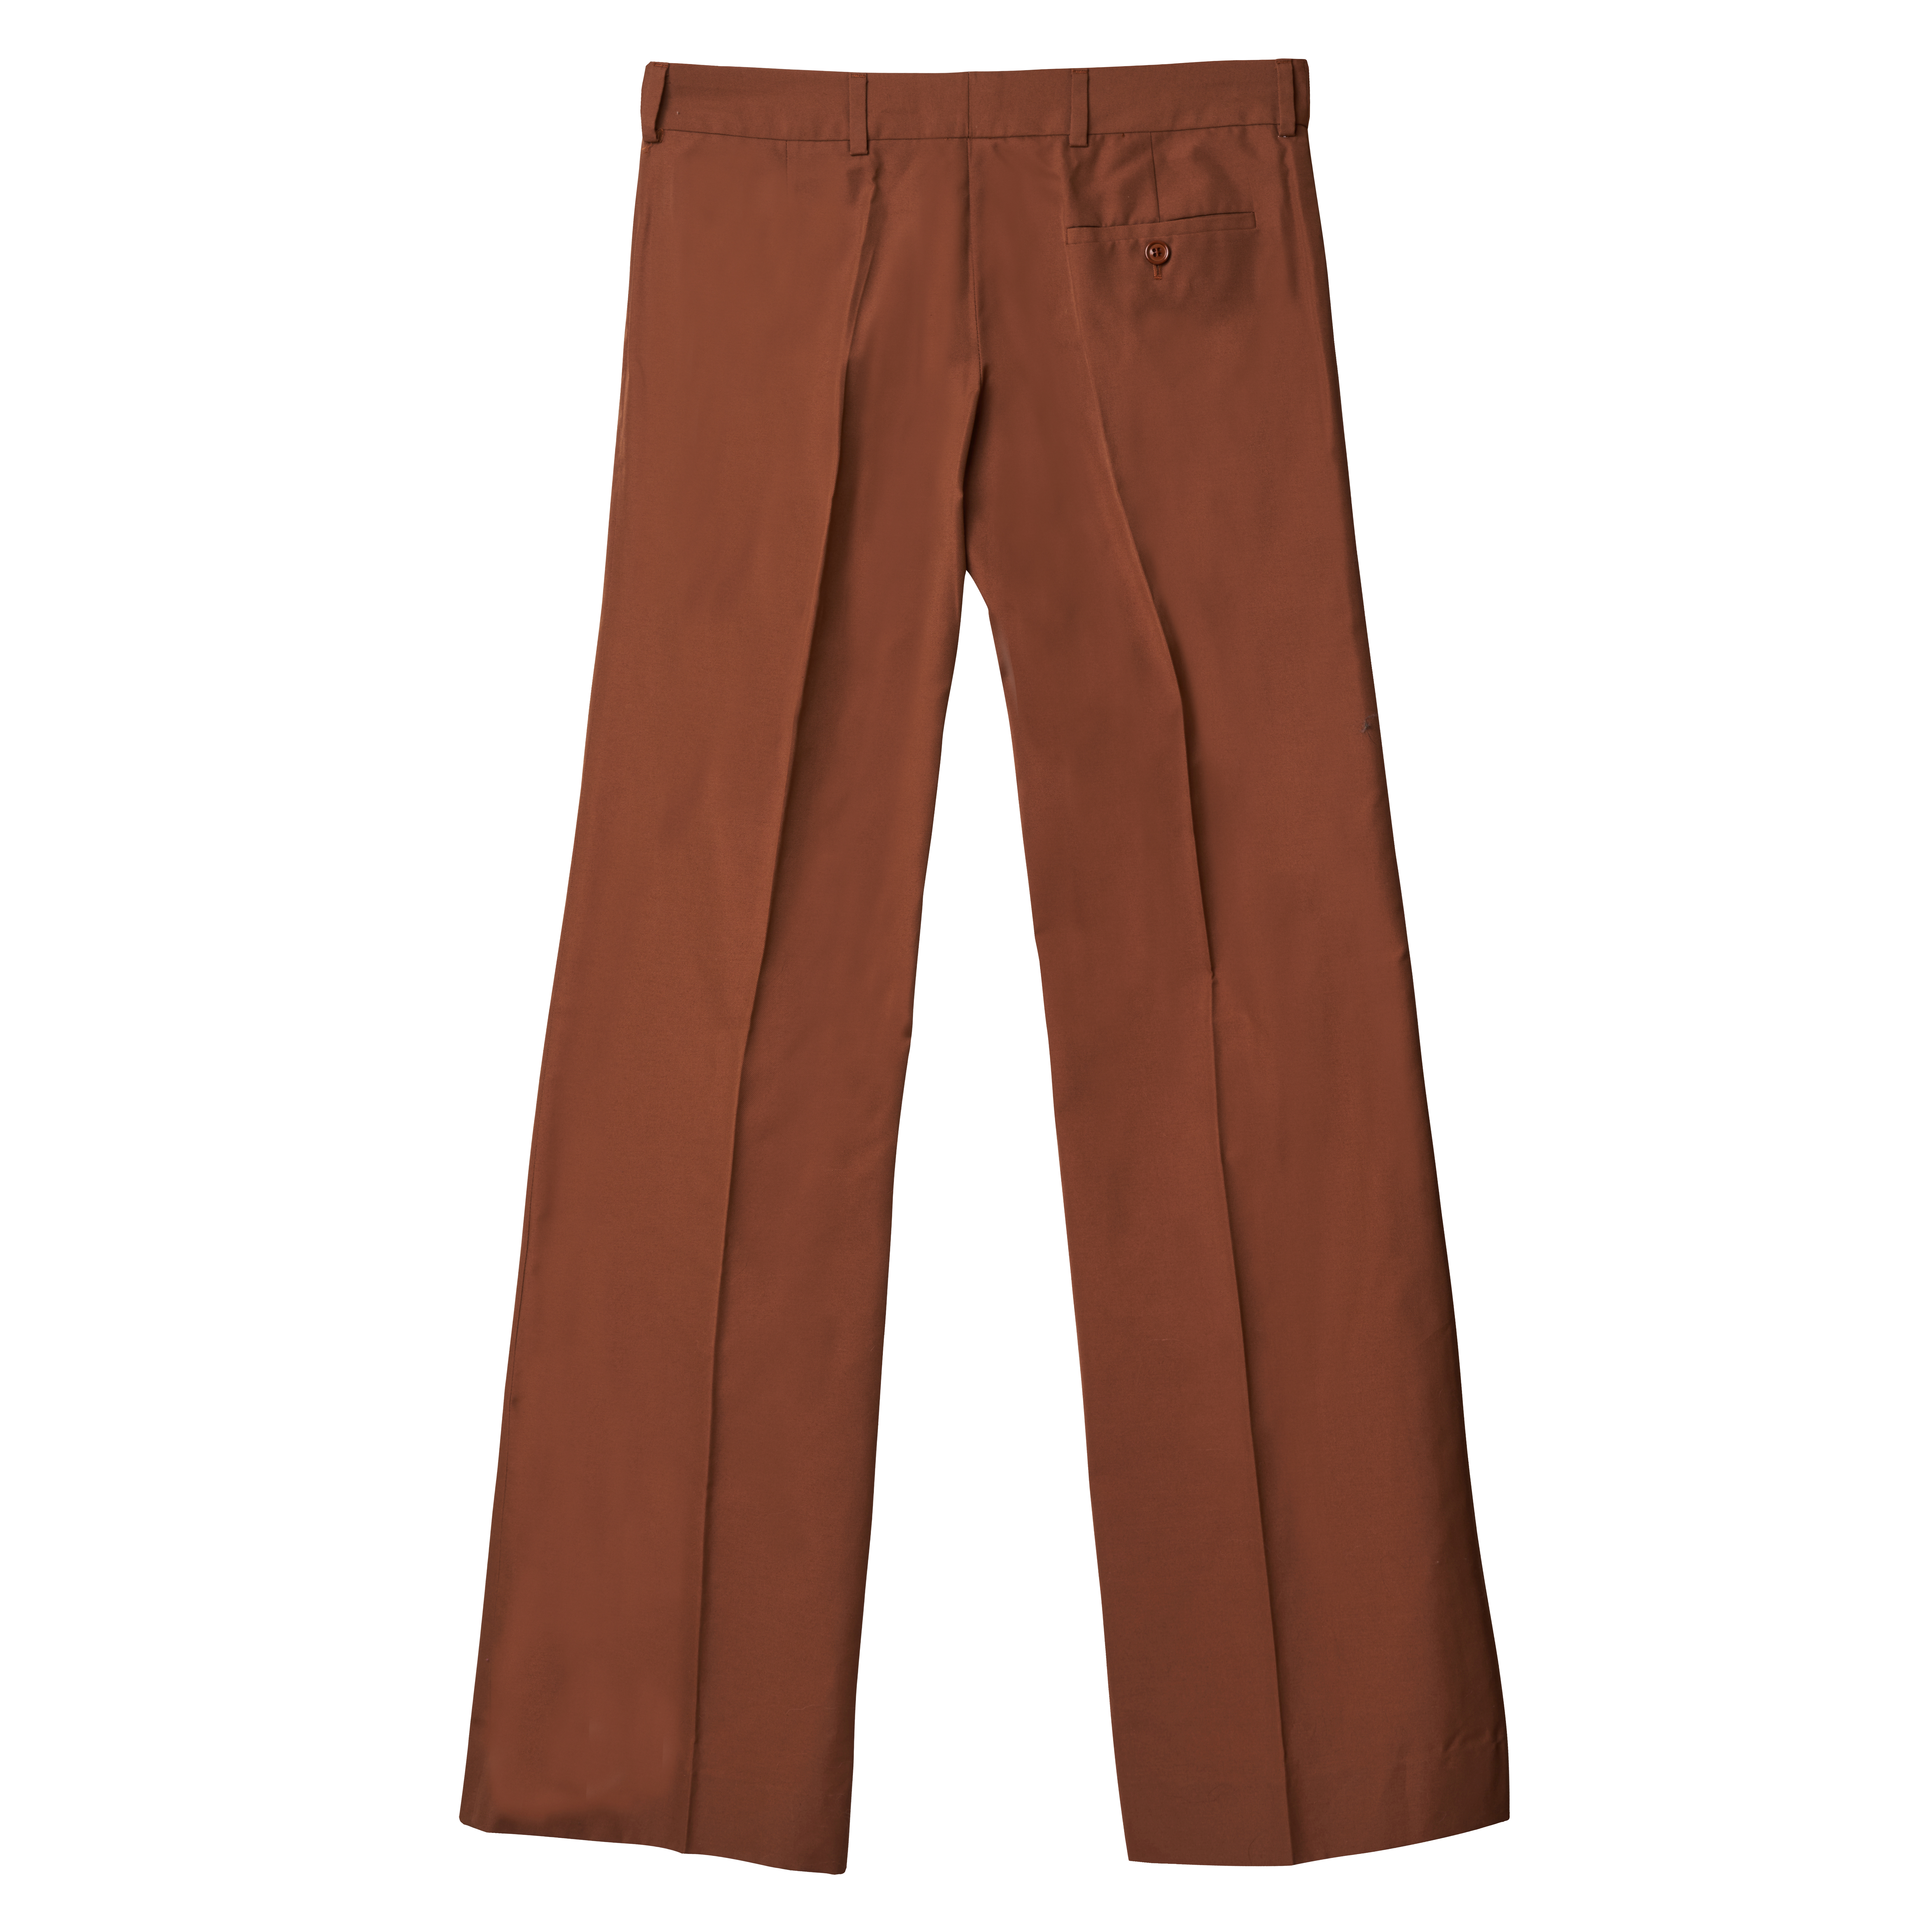 MIU MIU BROWN TROUSERS Condition grade A, new with tags. Size Italian 42. 80cm waist, 110cm len... - Image 2 of 2